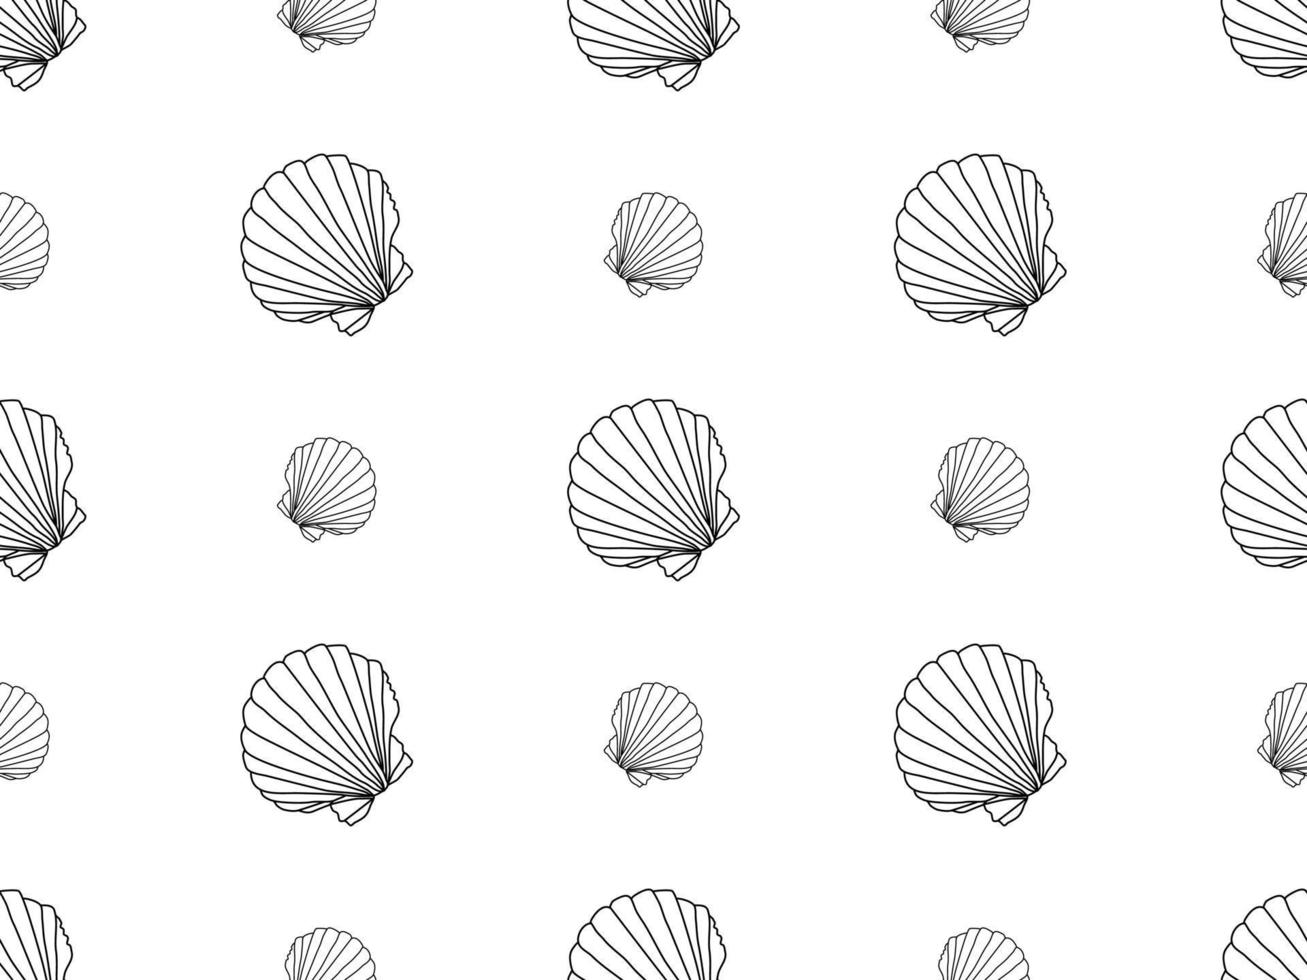 Scallops cartoon character seamless pattern on white background vector